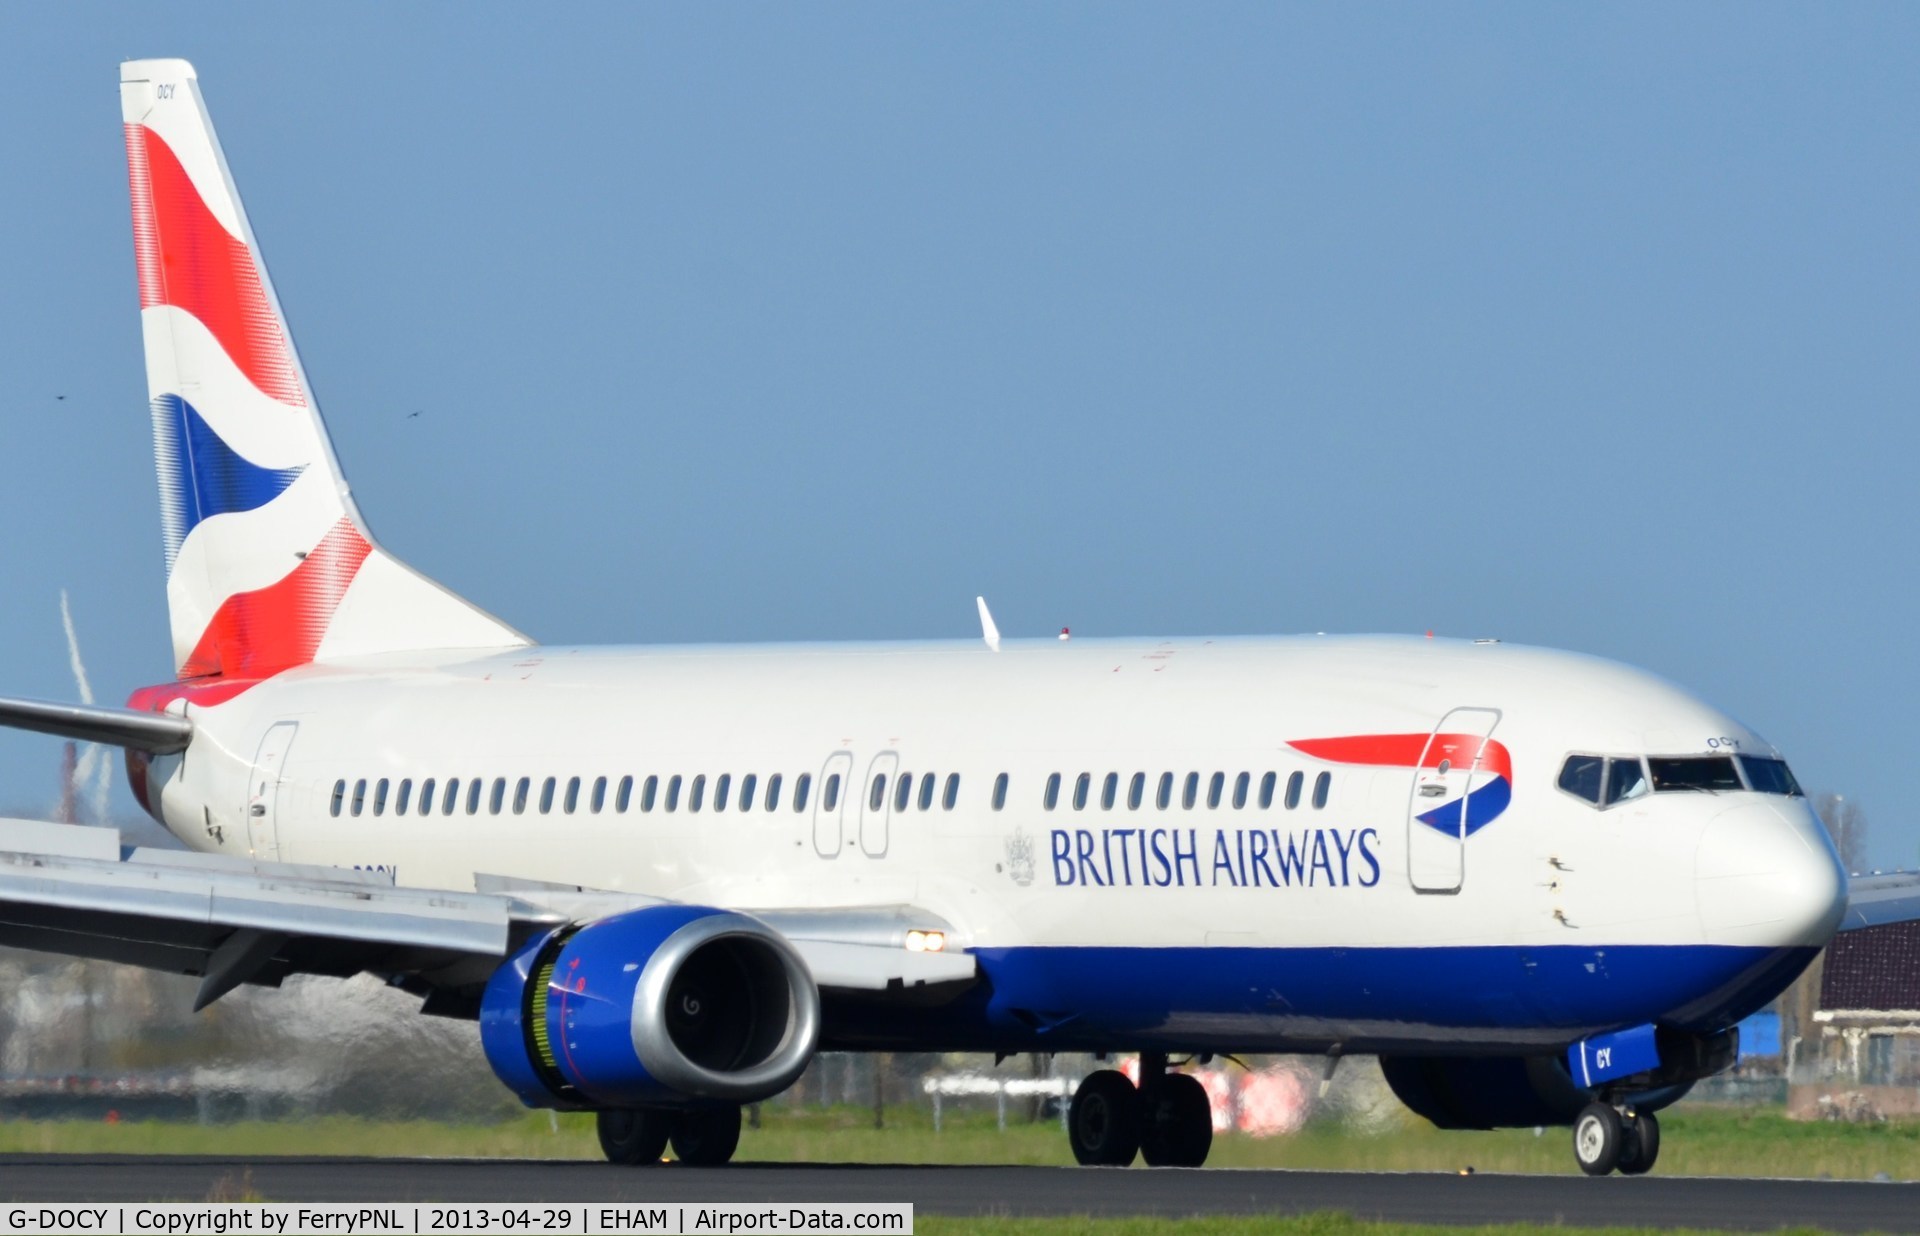 G-DOCY, 1993 Boeing 737-436 C/N 25844, BA B734 comming to a stop.